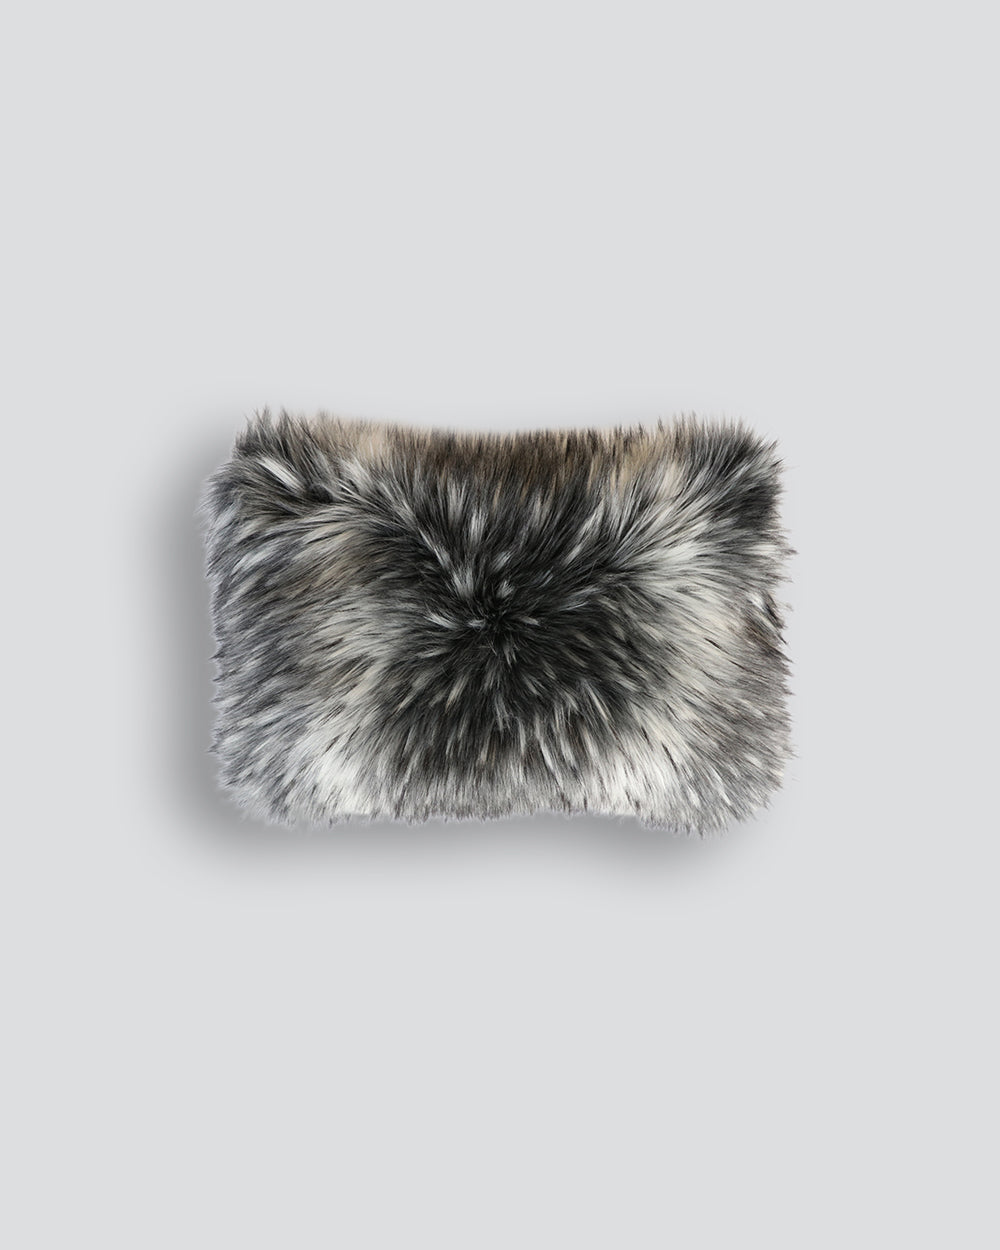 Heirloom Alaskan Wolf Cushions in Faux Fur are available from Make Your House A Home Premium Stockist. Furniture Store Bendigo, Victoria. Australia Wide Delivery. Furtex Baya.